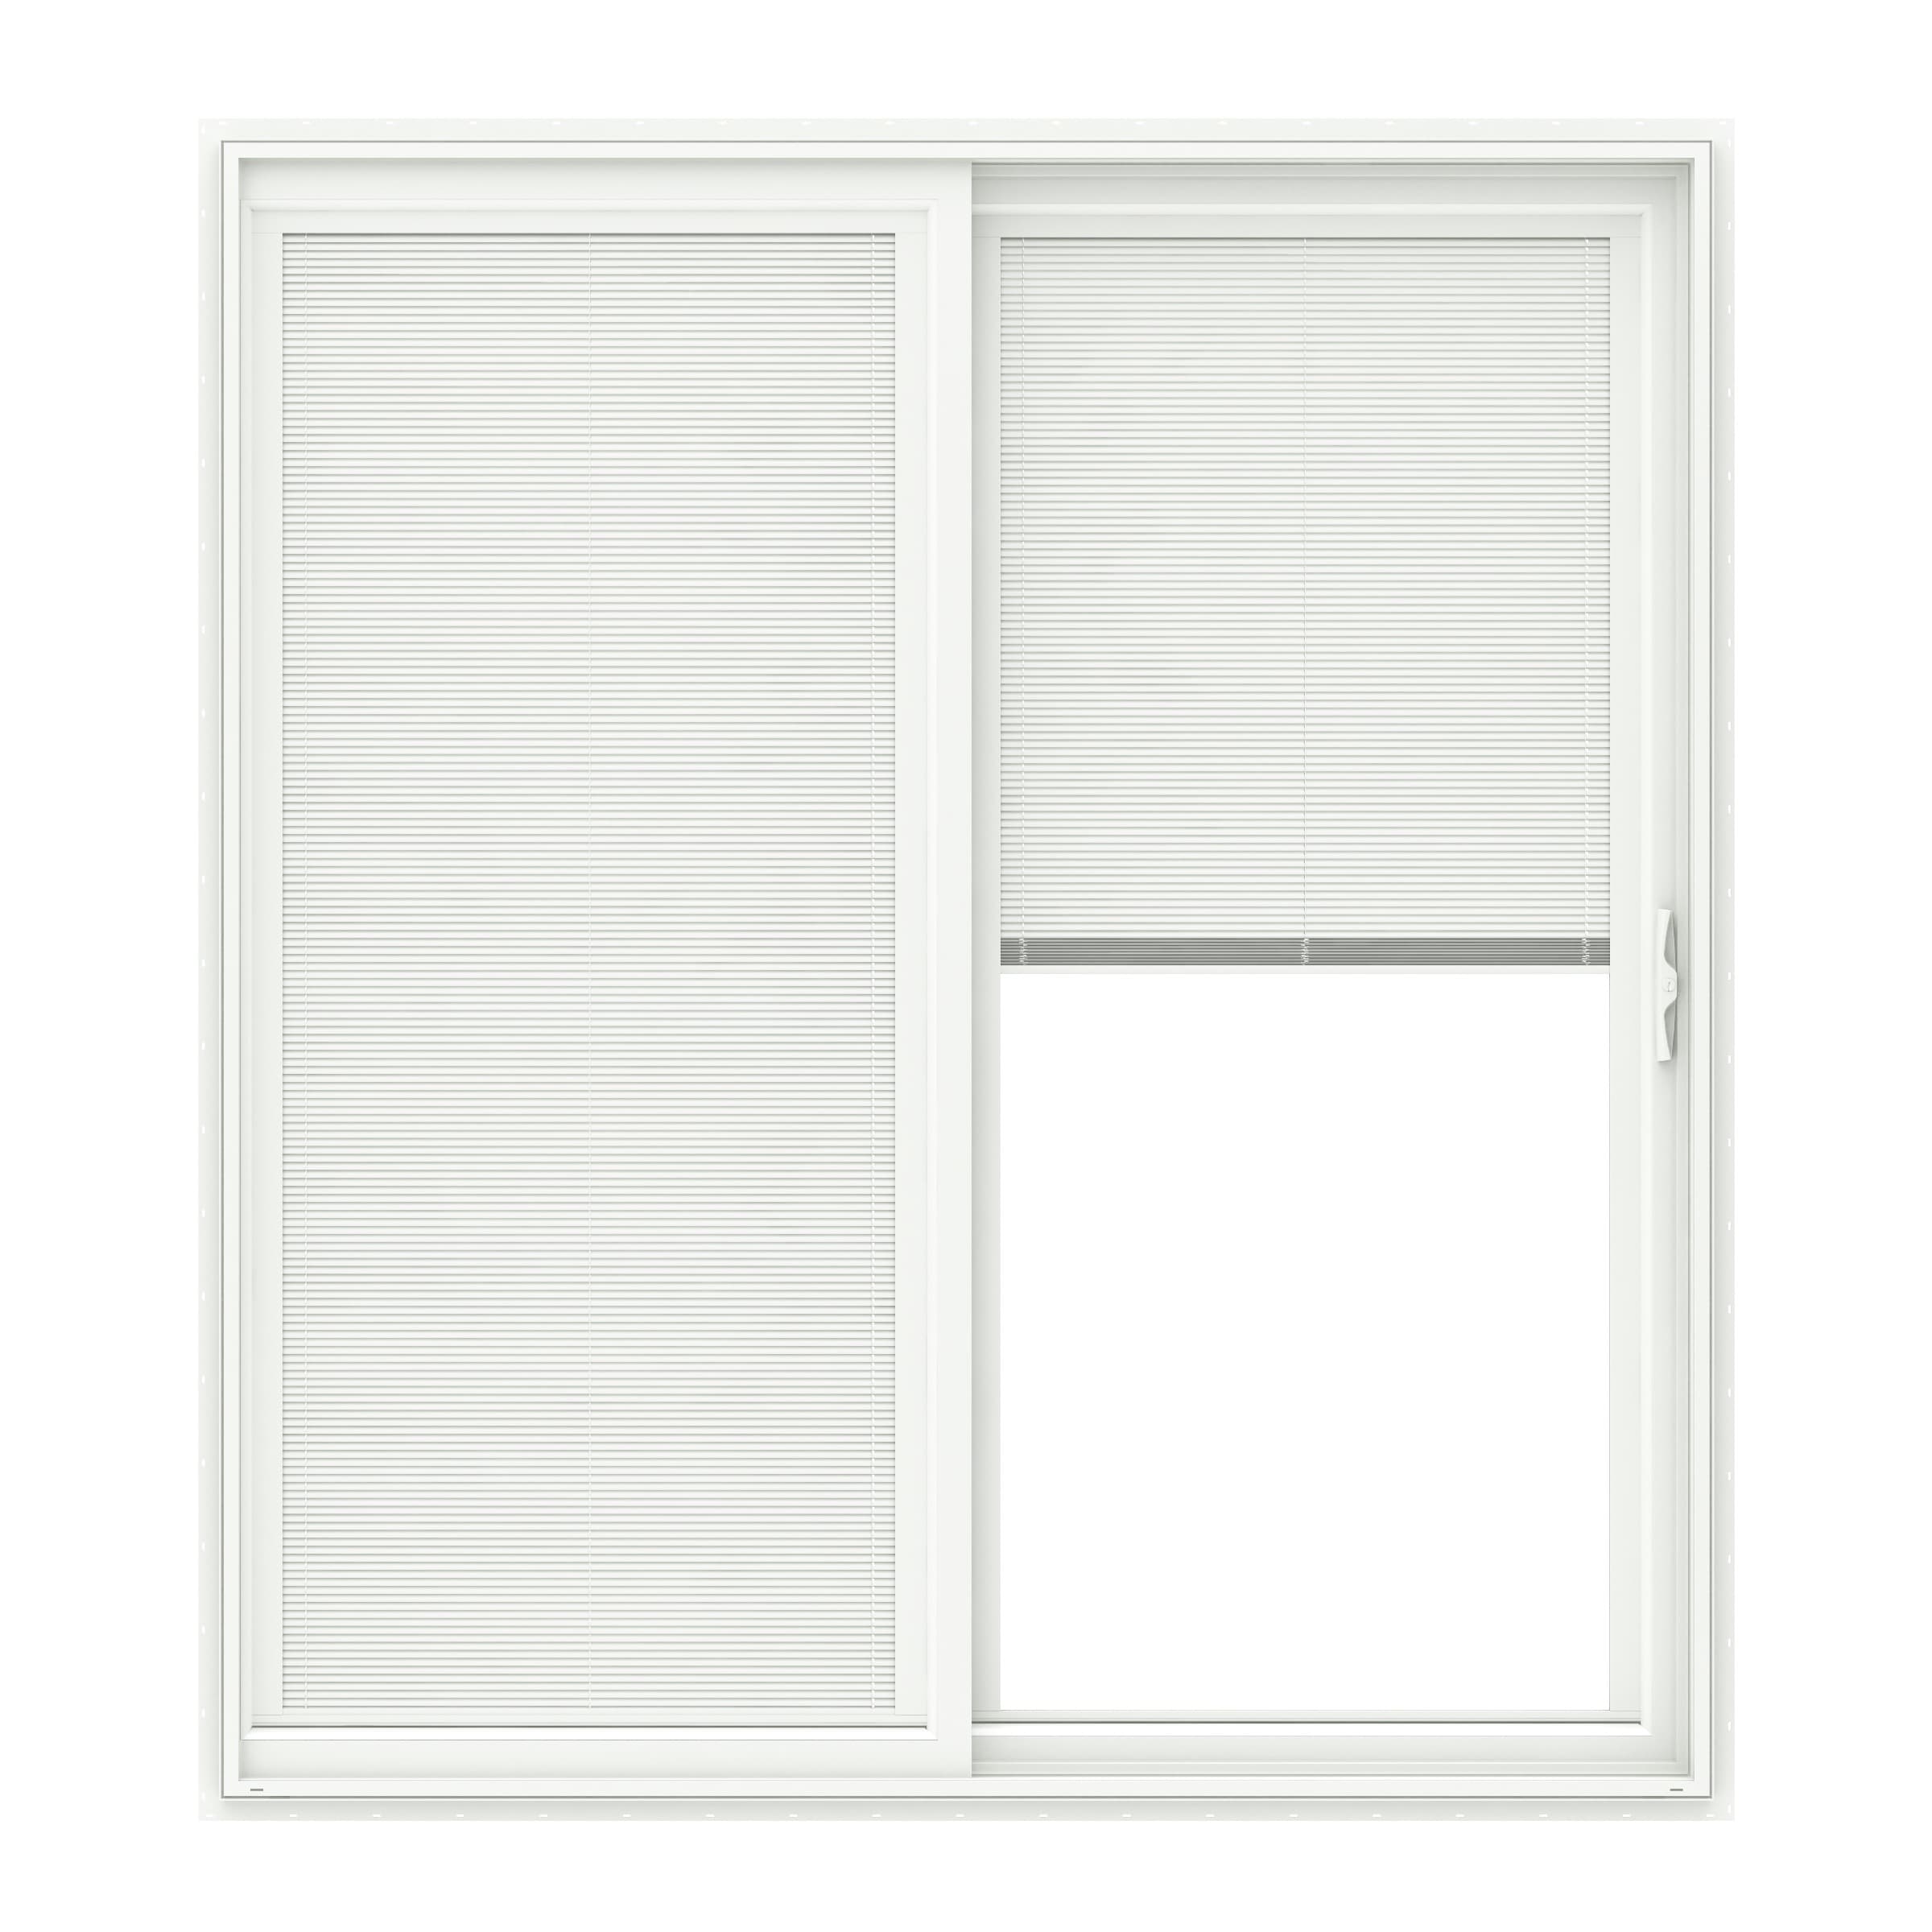 150 Series 72-in x 80-in Low-e Blinds Between The Glass White Vinyl Sliding Right-Hand Sliding Double Patio Door | - Pella 1000008979